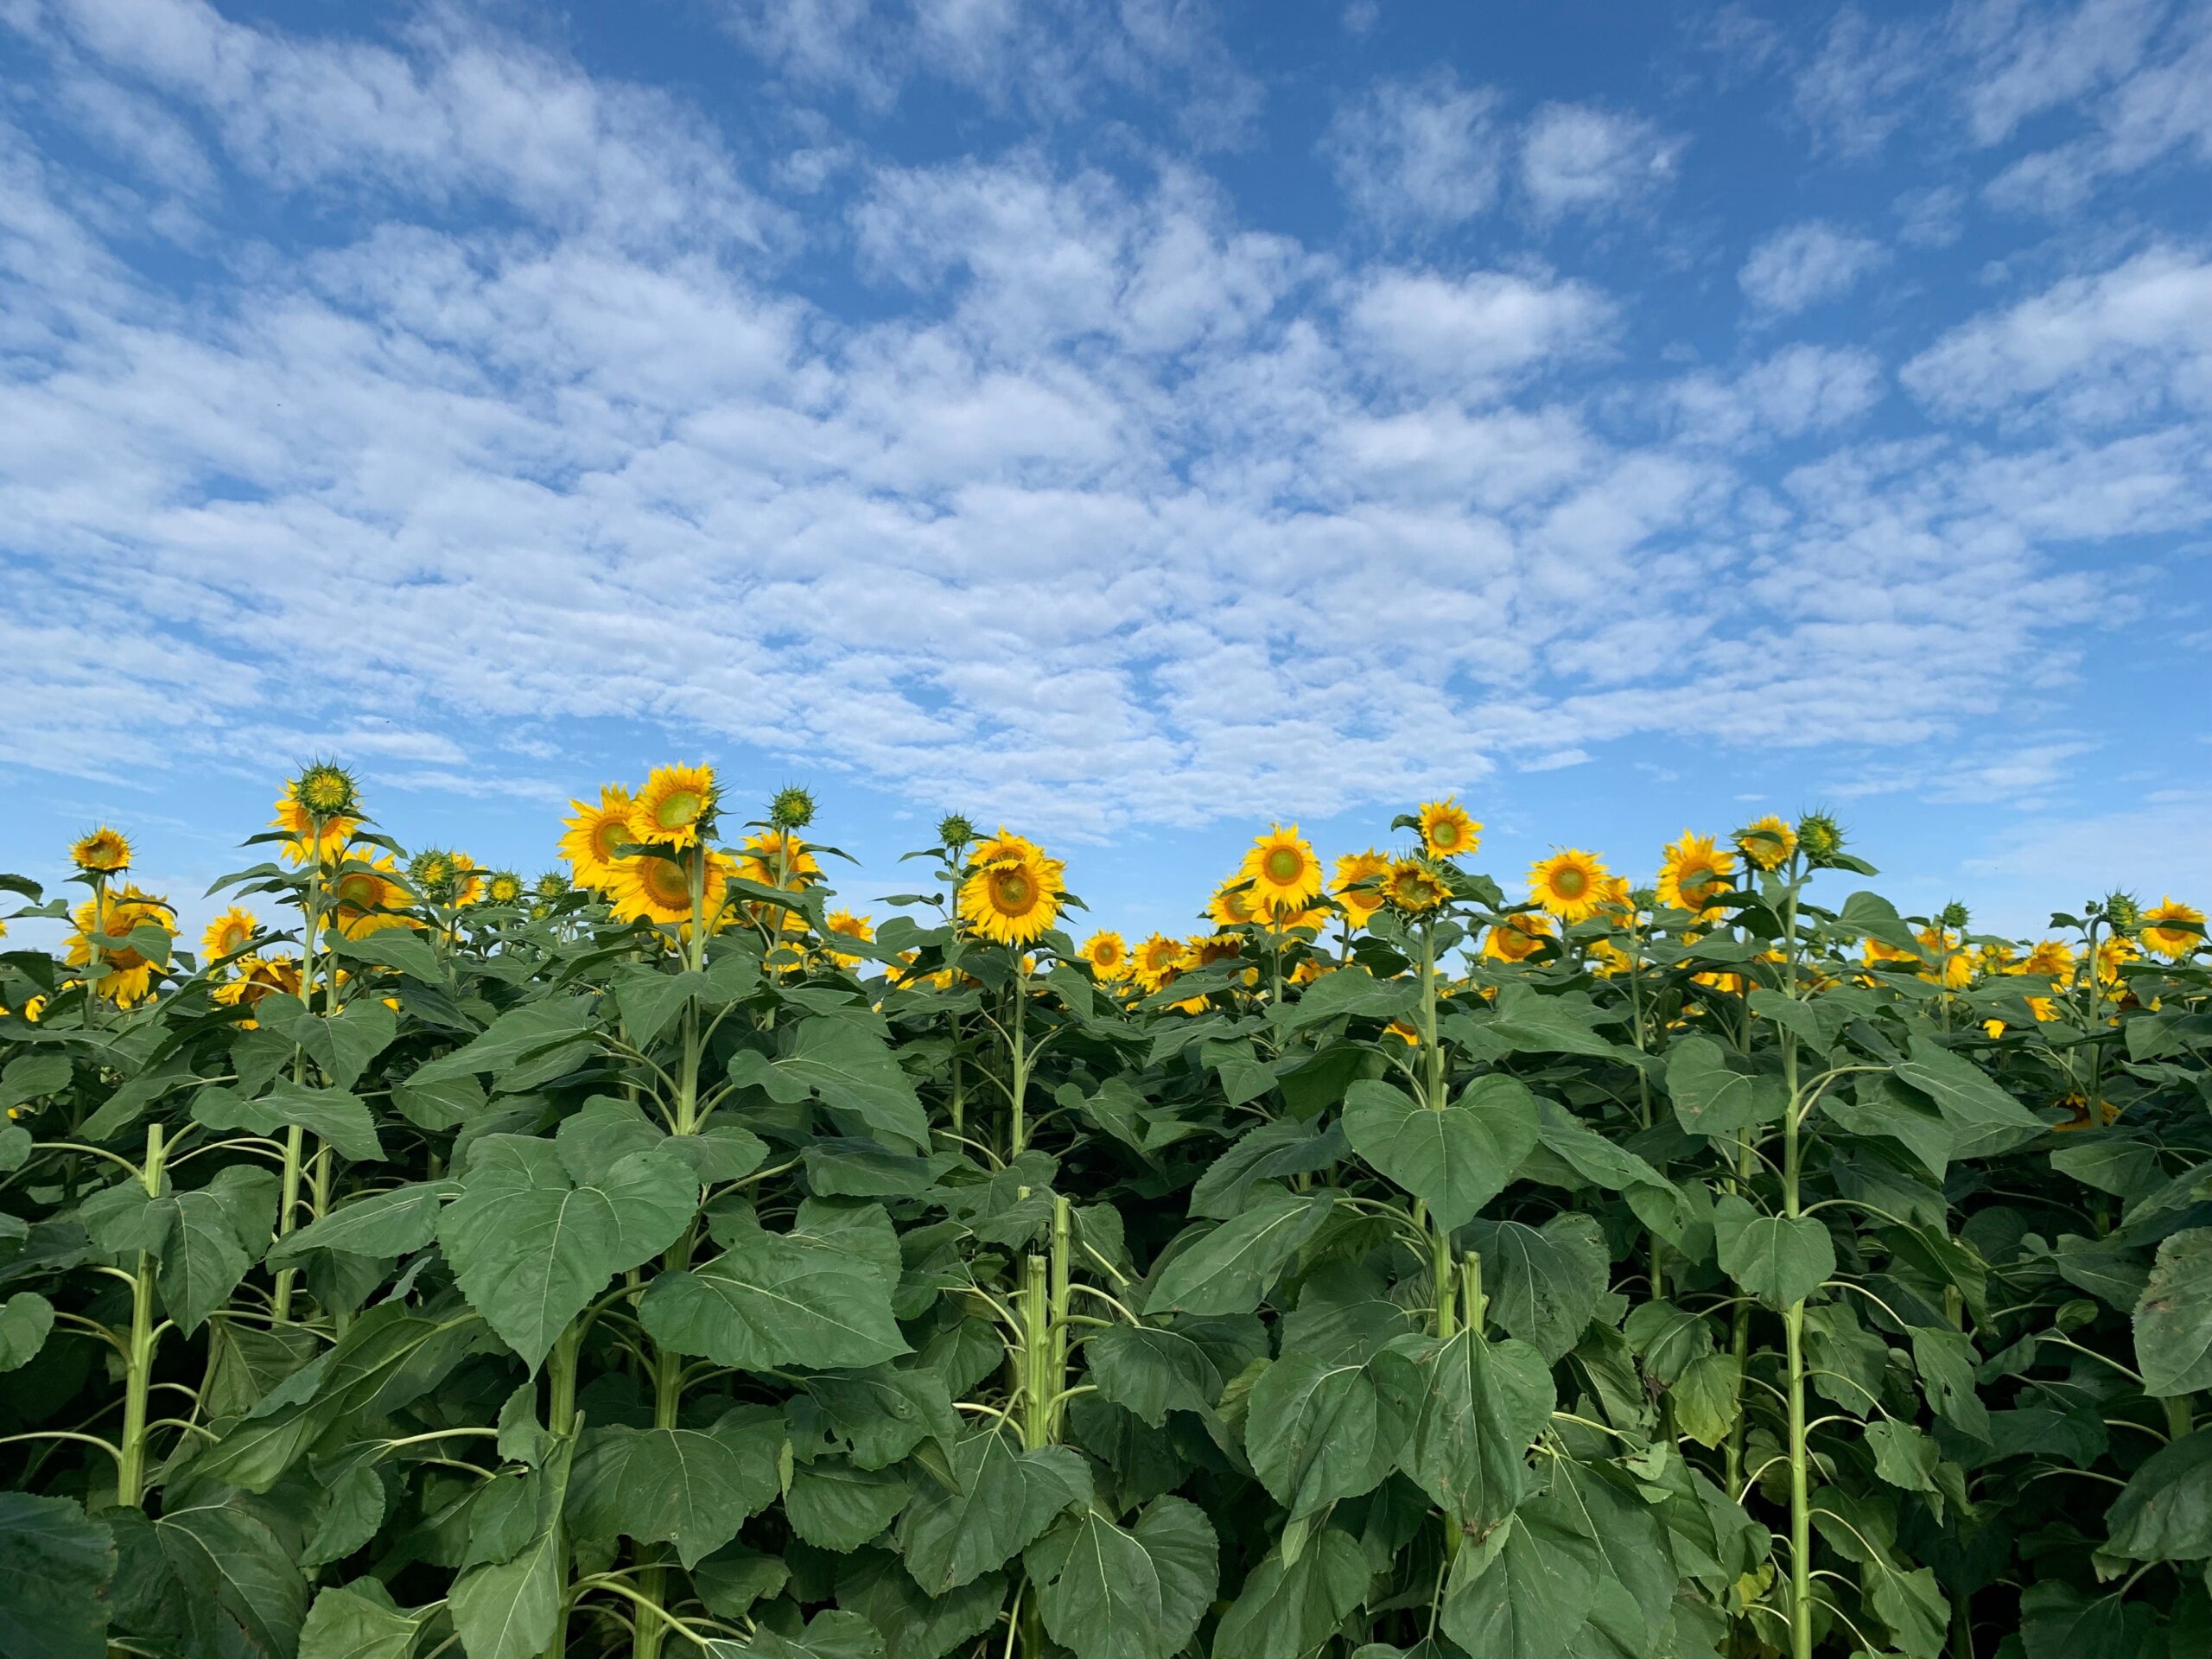 Sunflowers standing tall with a cloudy blue skye but cl